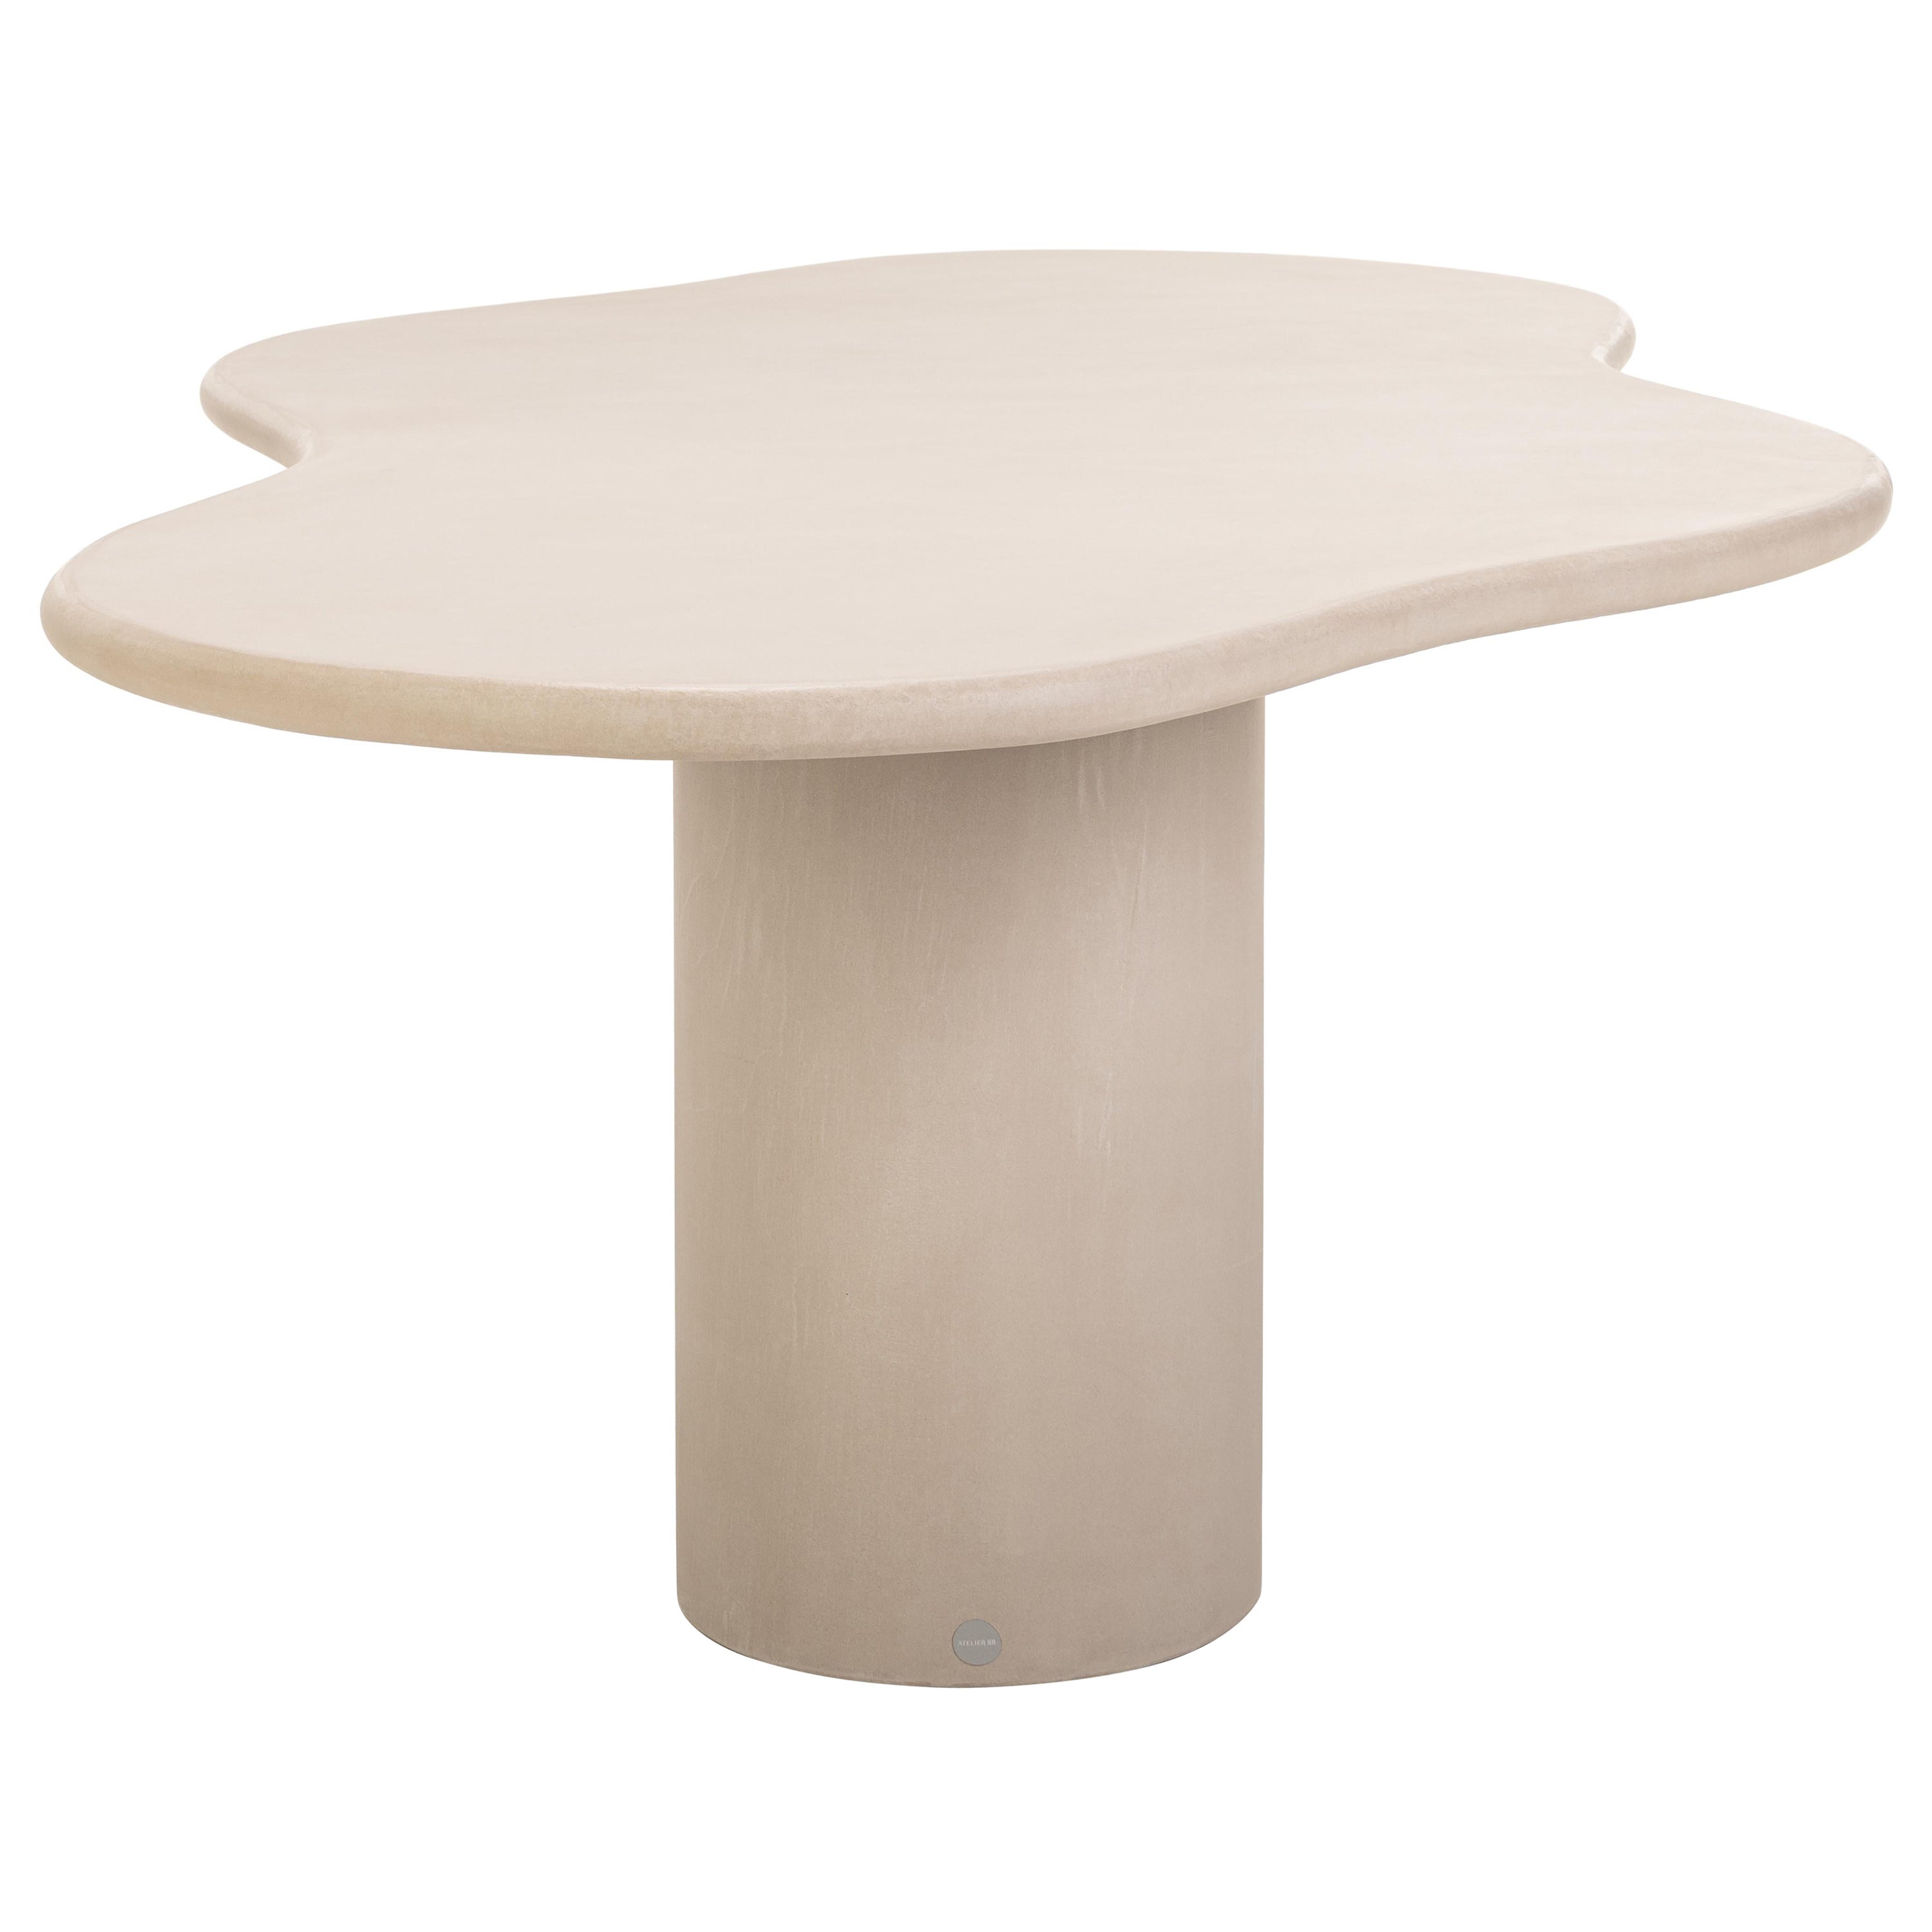 Contemporary Organic Natural Plaster "Fluent" Table 280cm by Isabelle Beaumont